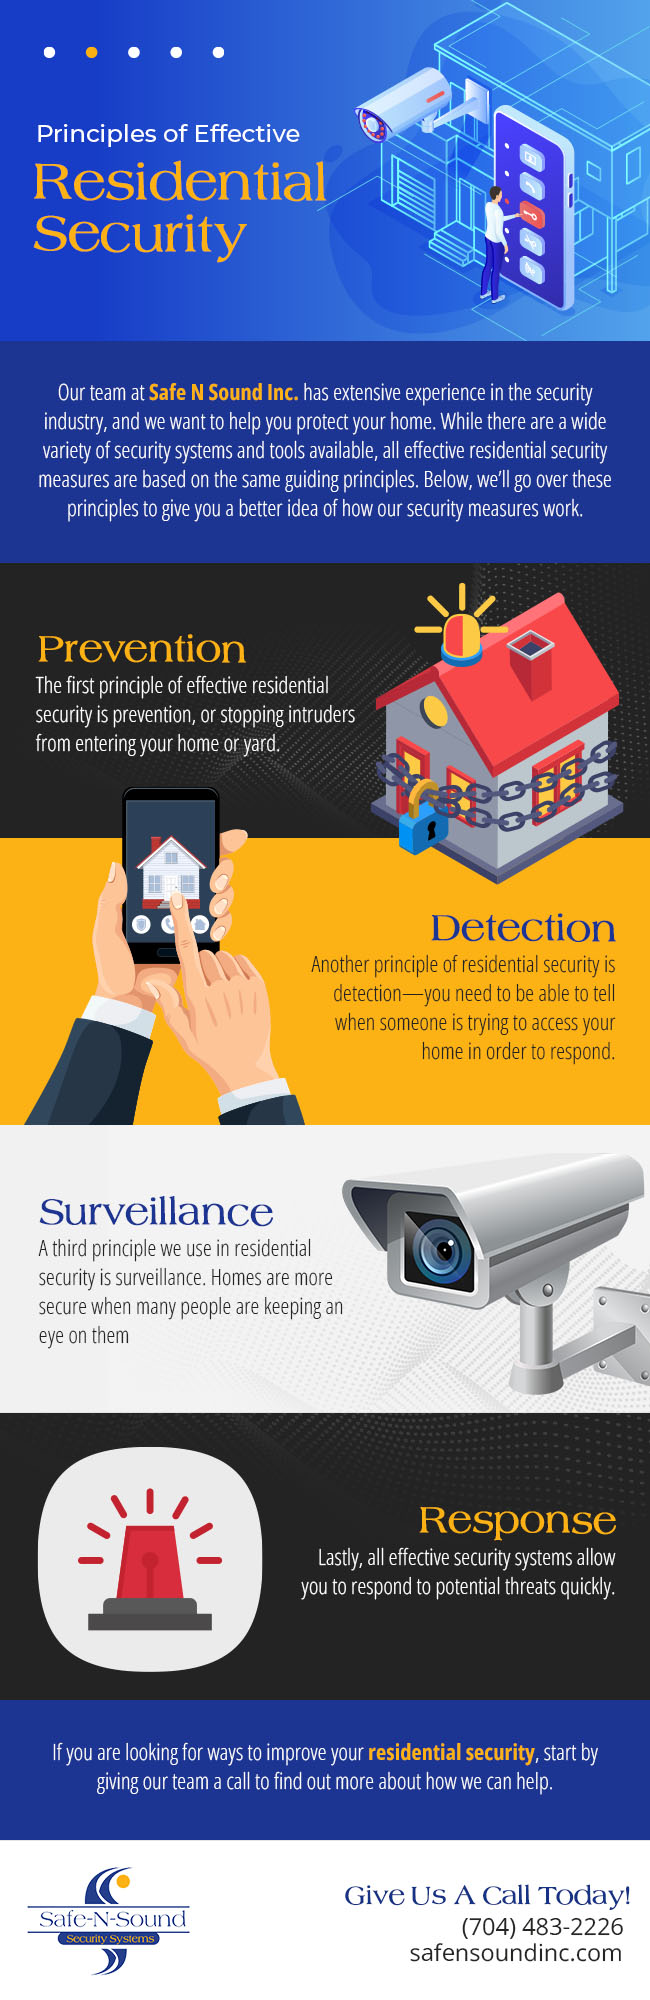 Principles of effective residential security